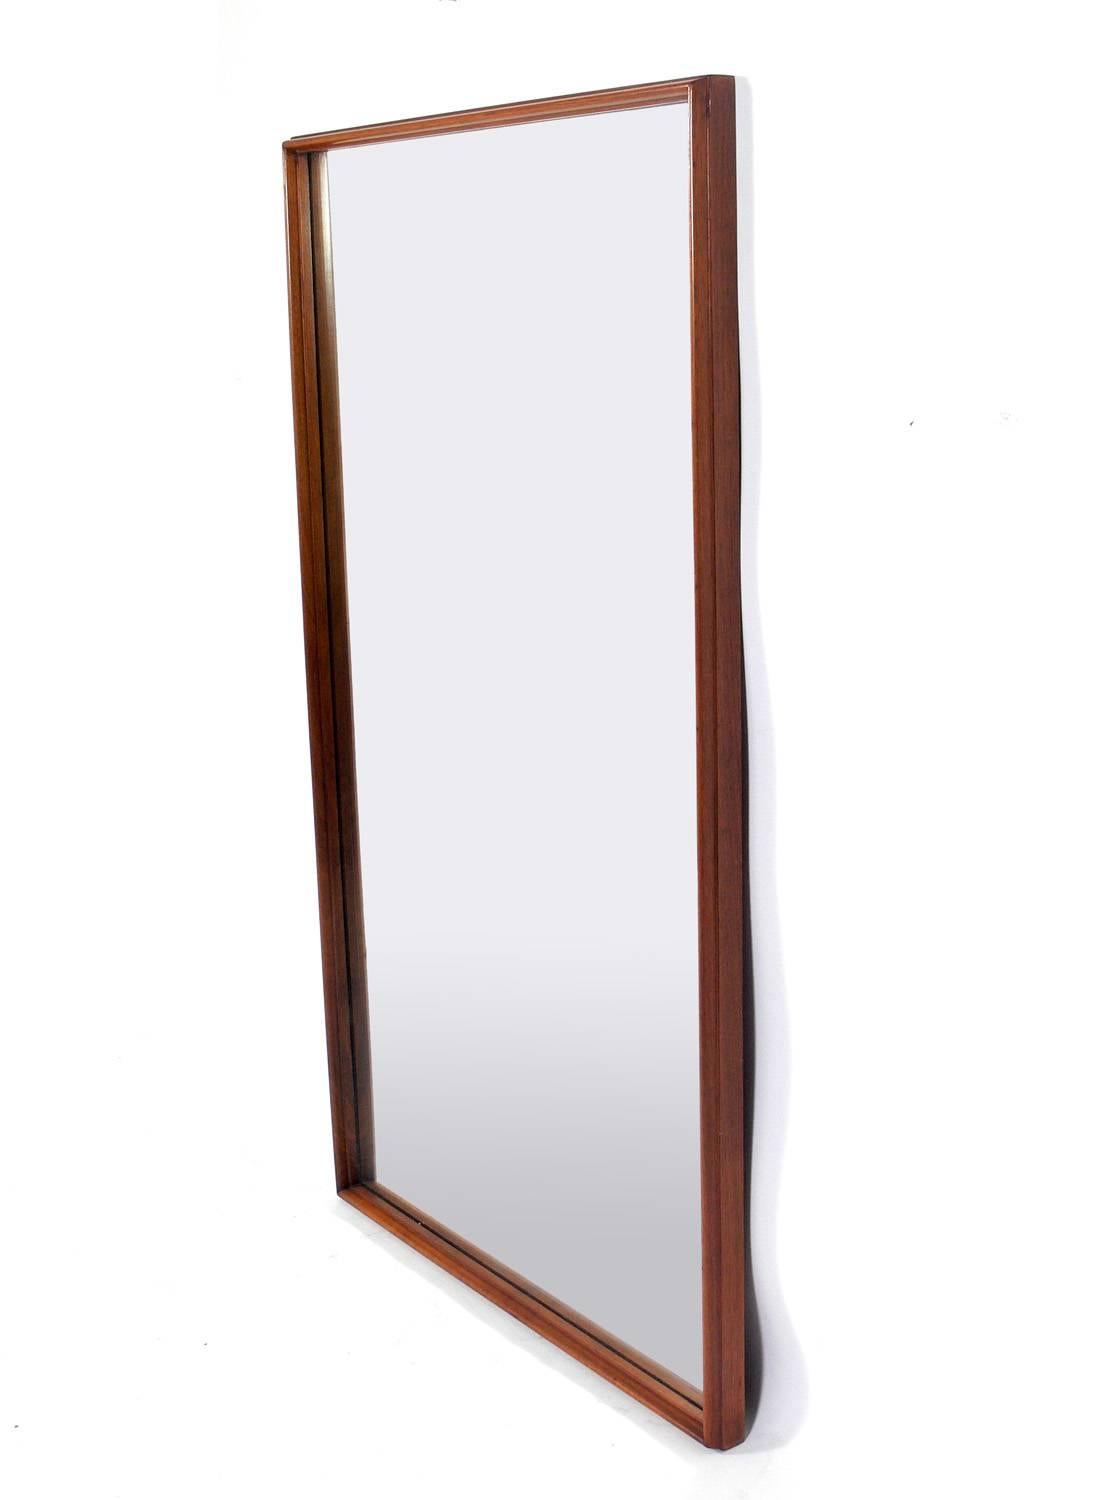 Clean lined modern mirror, designed by T.H. Robsjohn-Gibbings for Widdicomb, circa 1950s. This piece is currently being refinished and can be finished in your choice of color. The price listed includes refinishing.